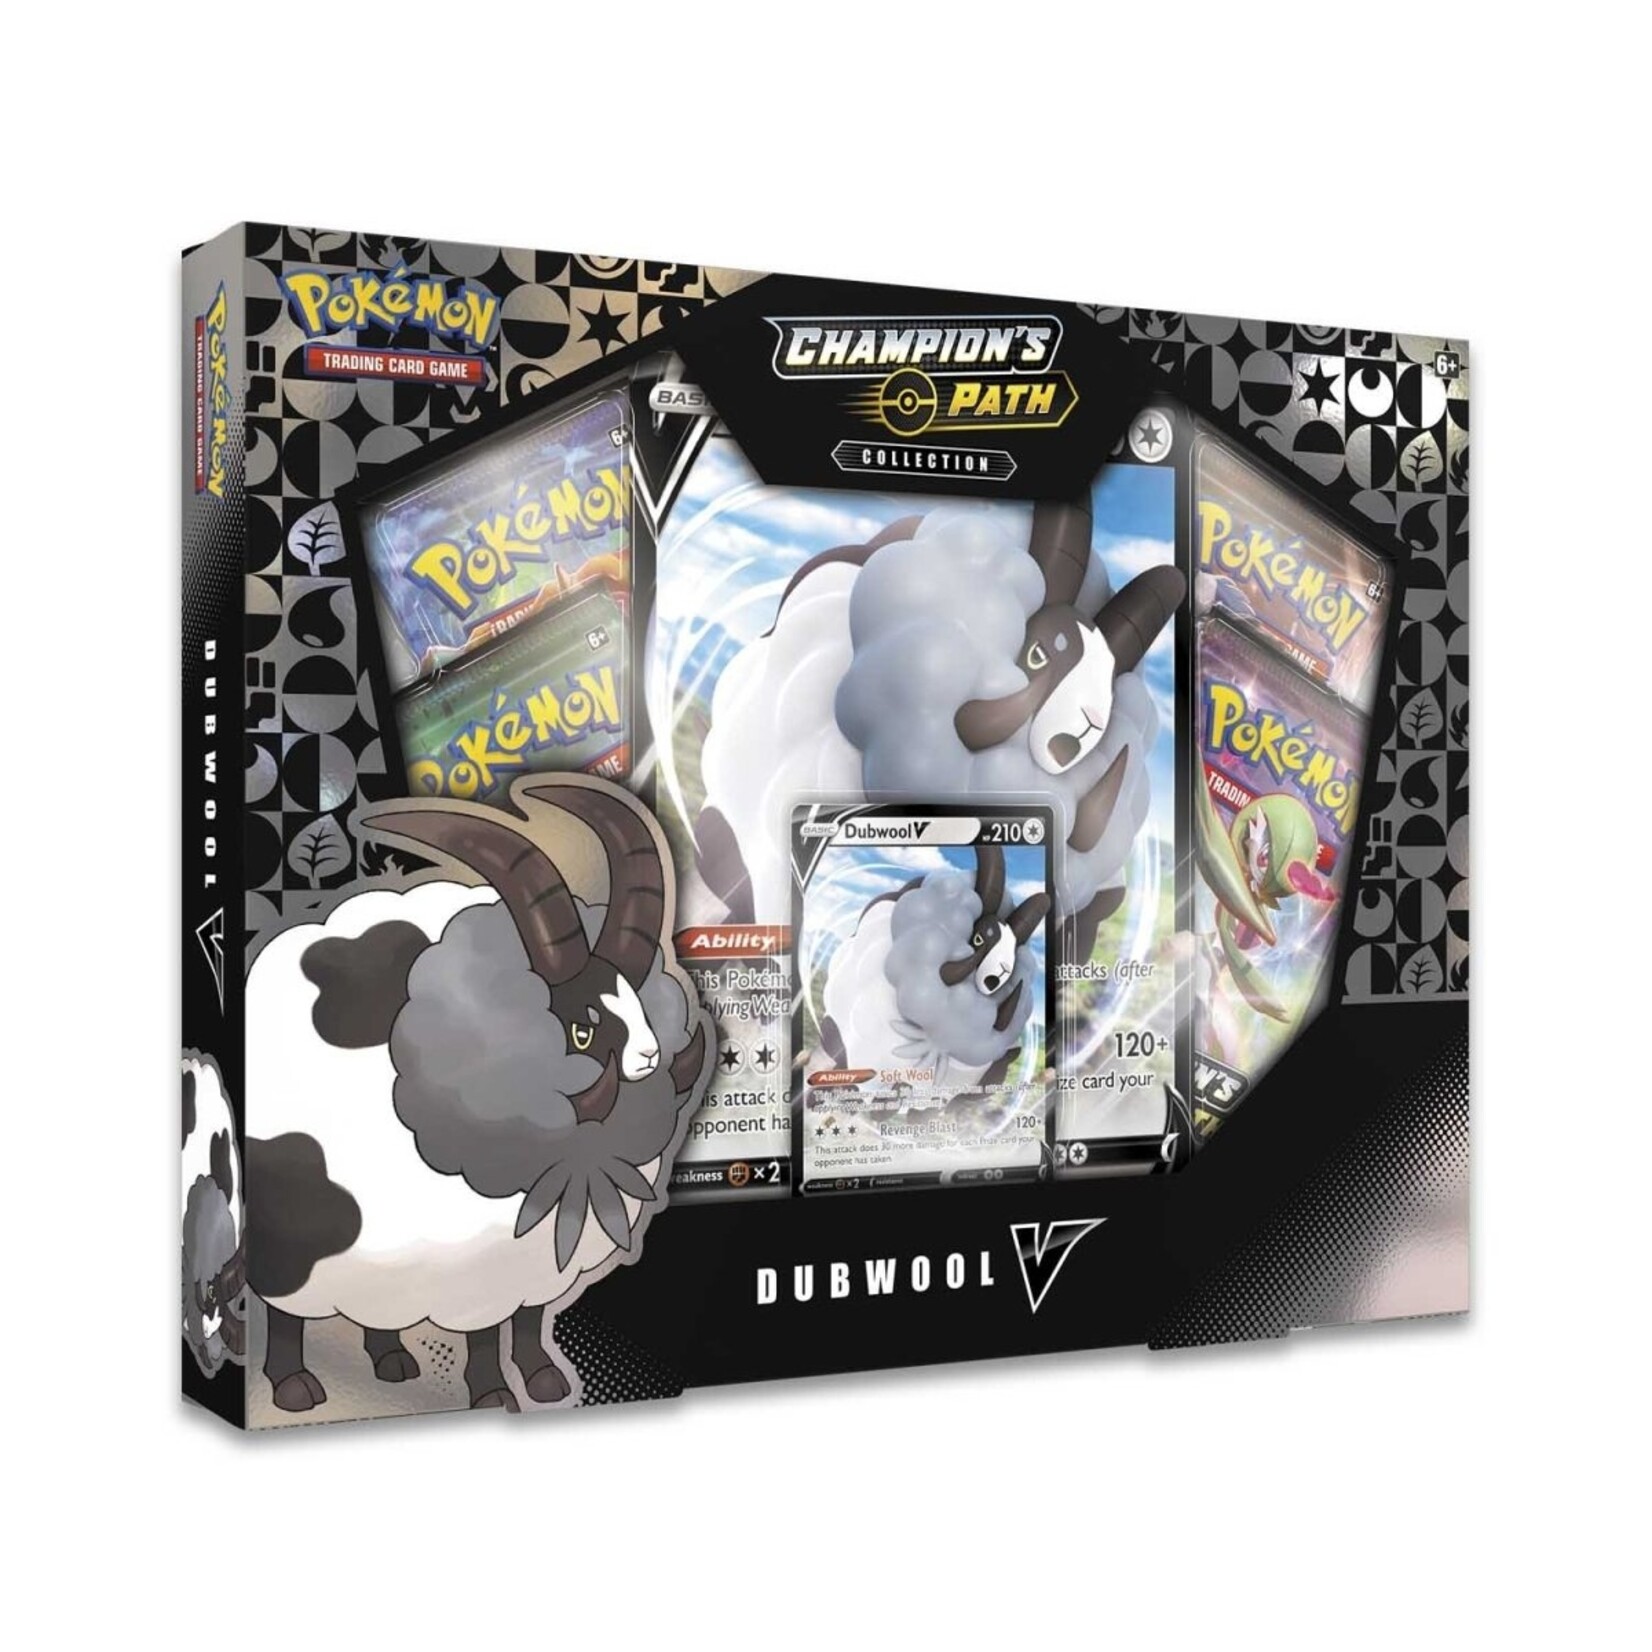 Pokemon Champion's path Dubwool V collection